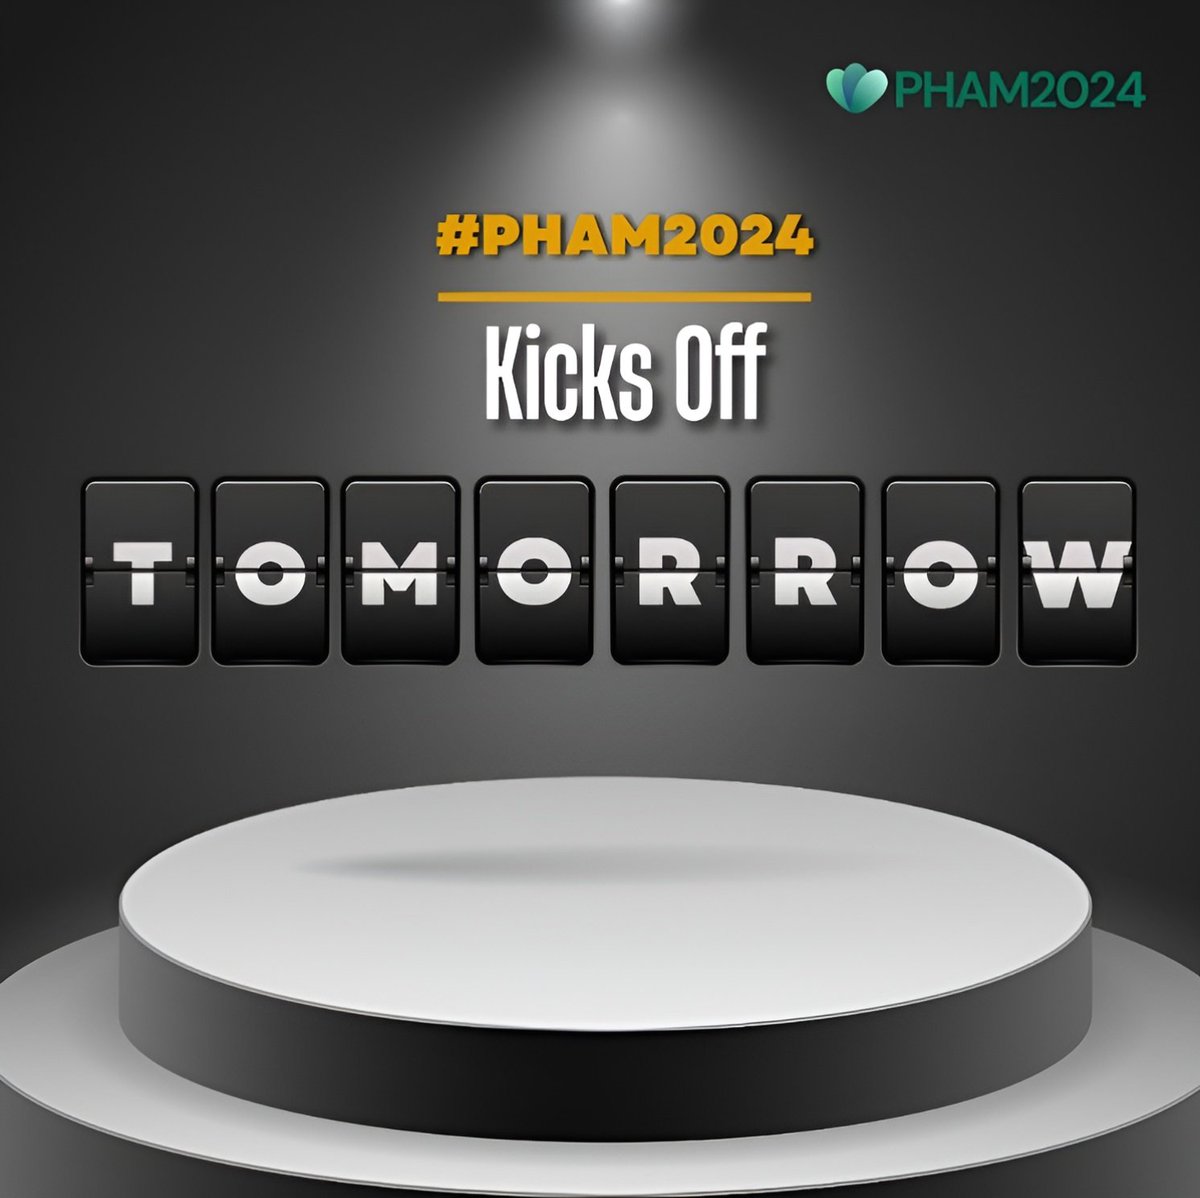 1 Day Left! #PHAM2024 kicks off tomorrow. Don't miss daily social media updates and live Instagram stories for a front-row seat to the action!

#PlanetaryHealth #Sustainability #FromEvidenceToAction